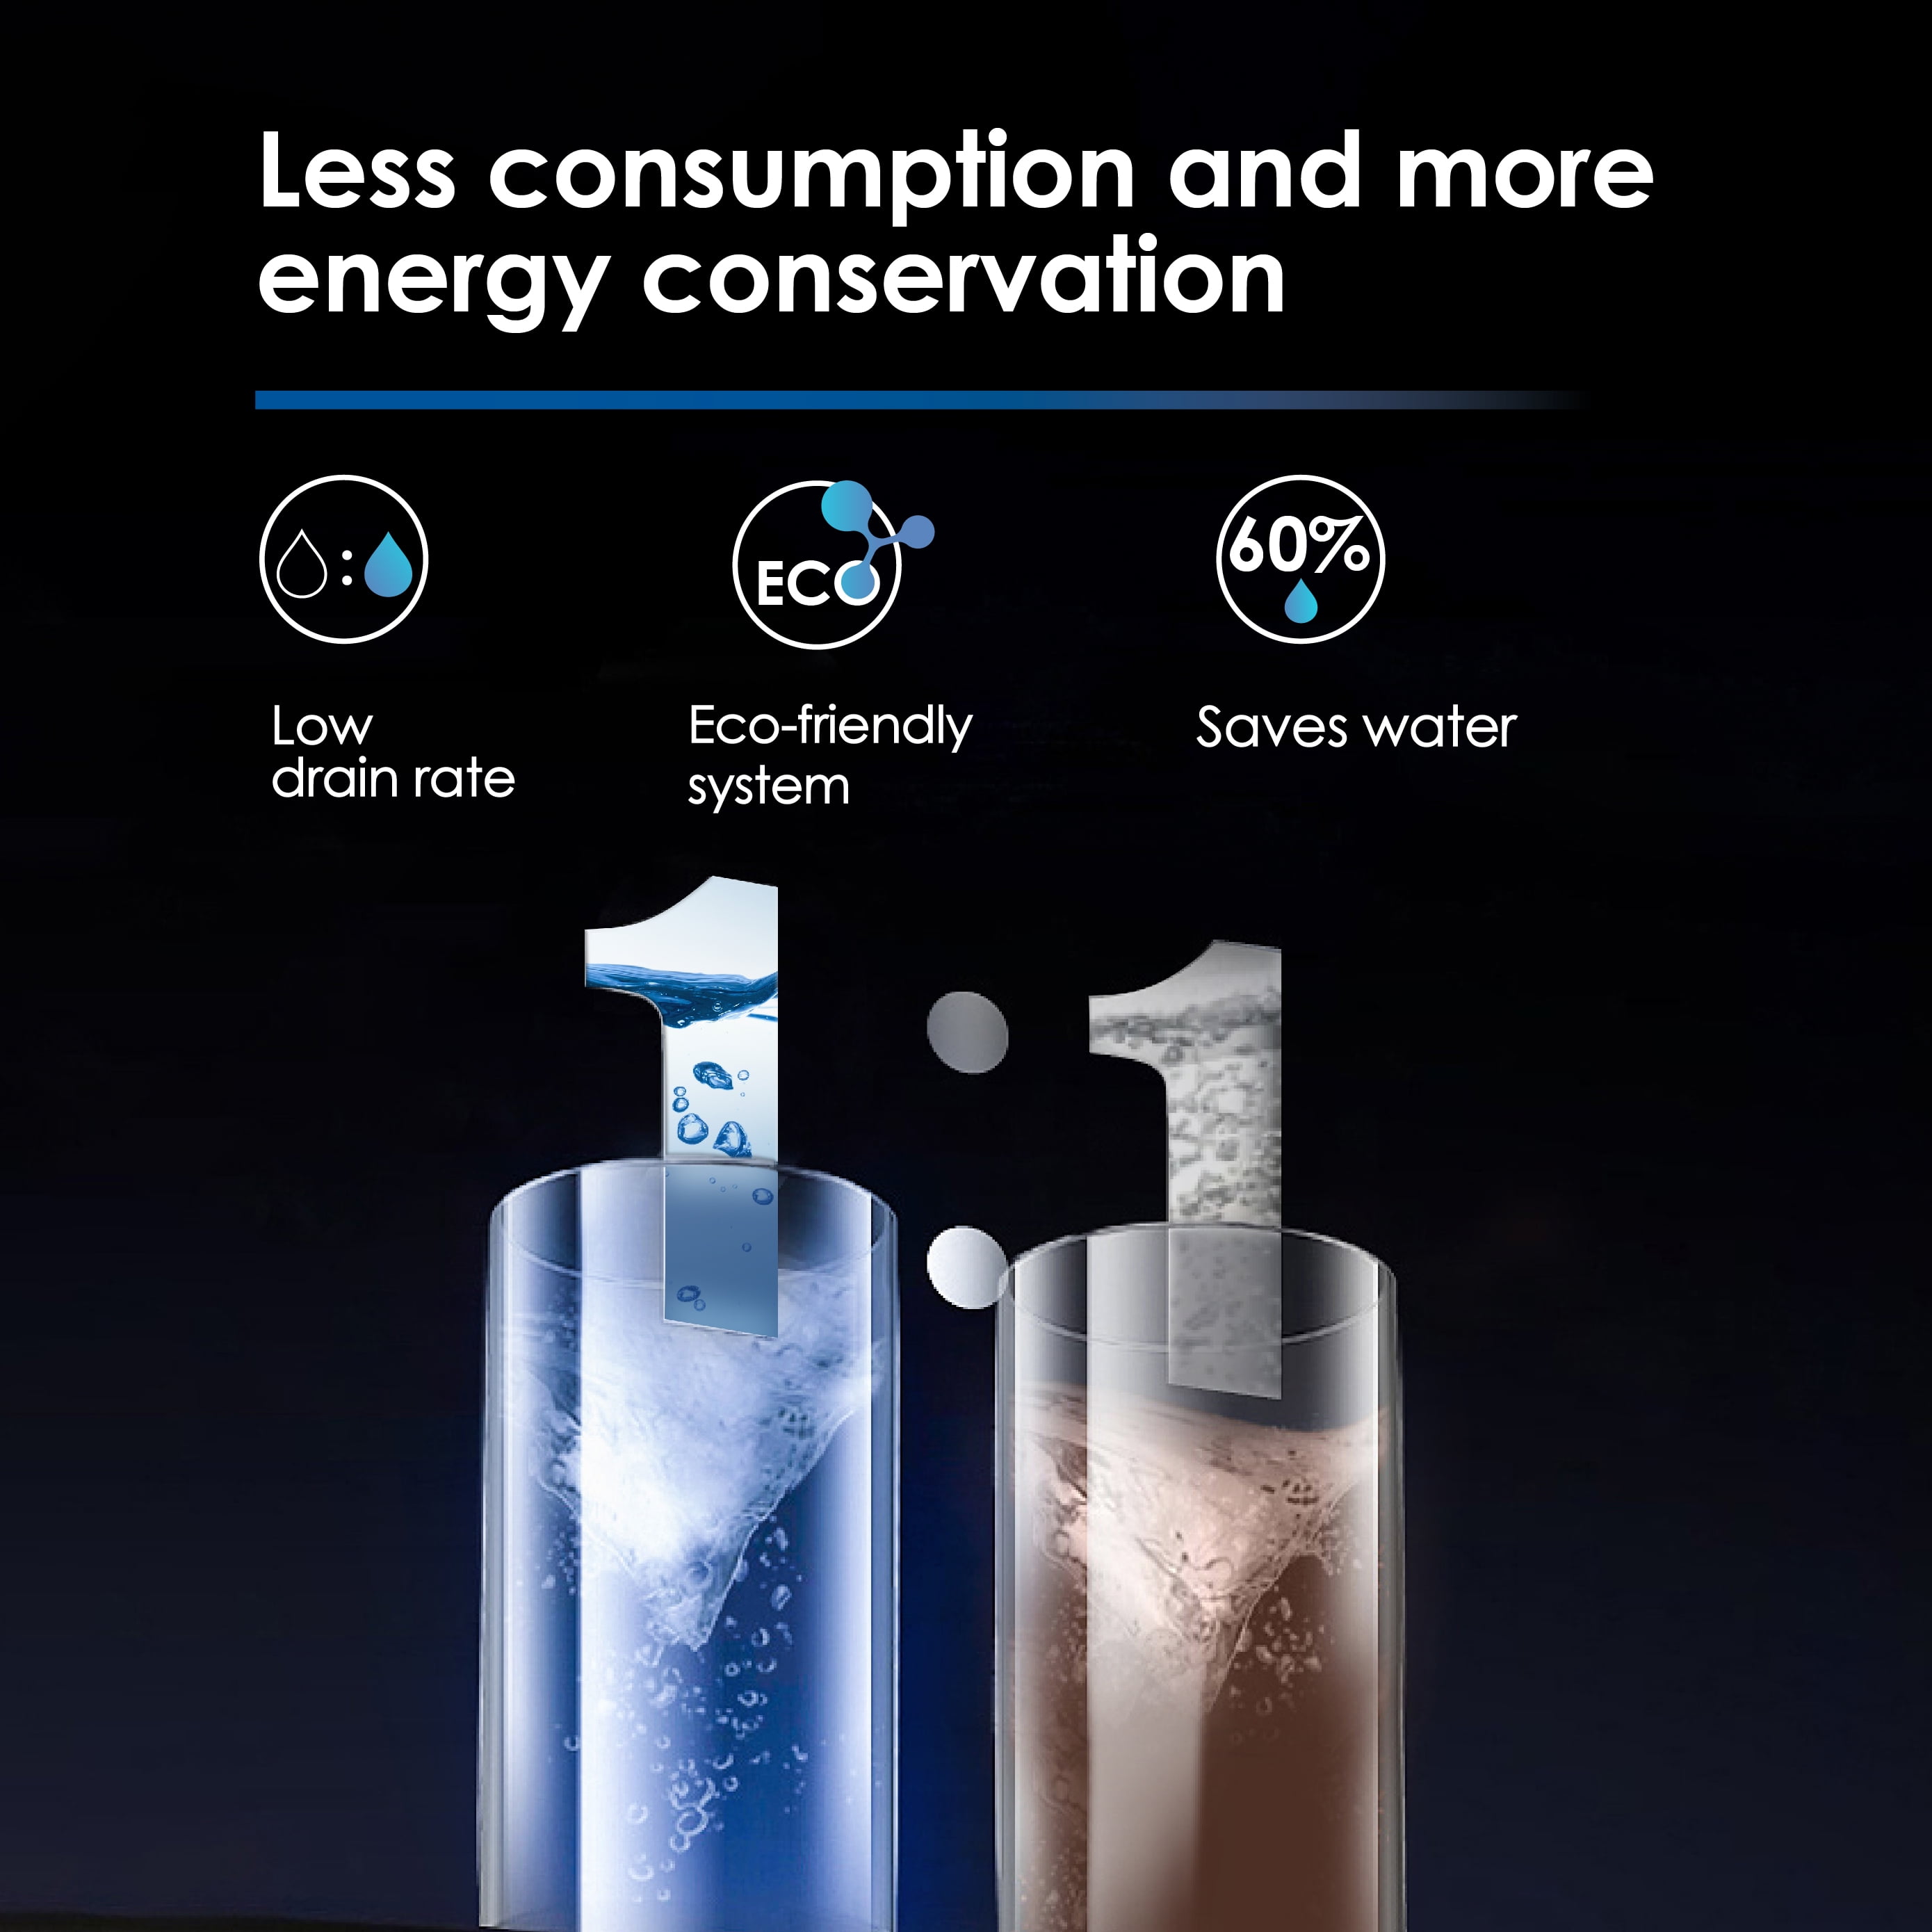 Waterdrop RO Reverse Osmosis Water Filtration System,TDS Reduction,NSF  Certified